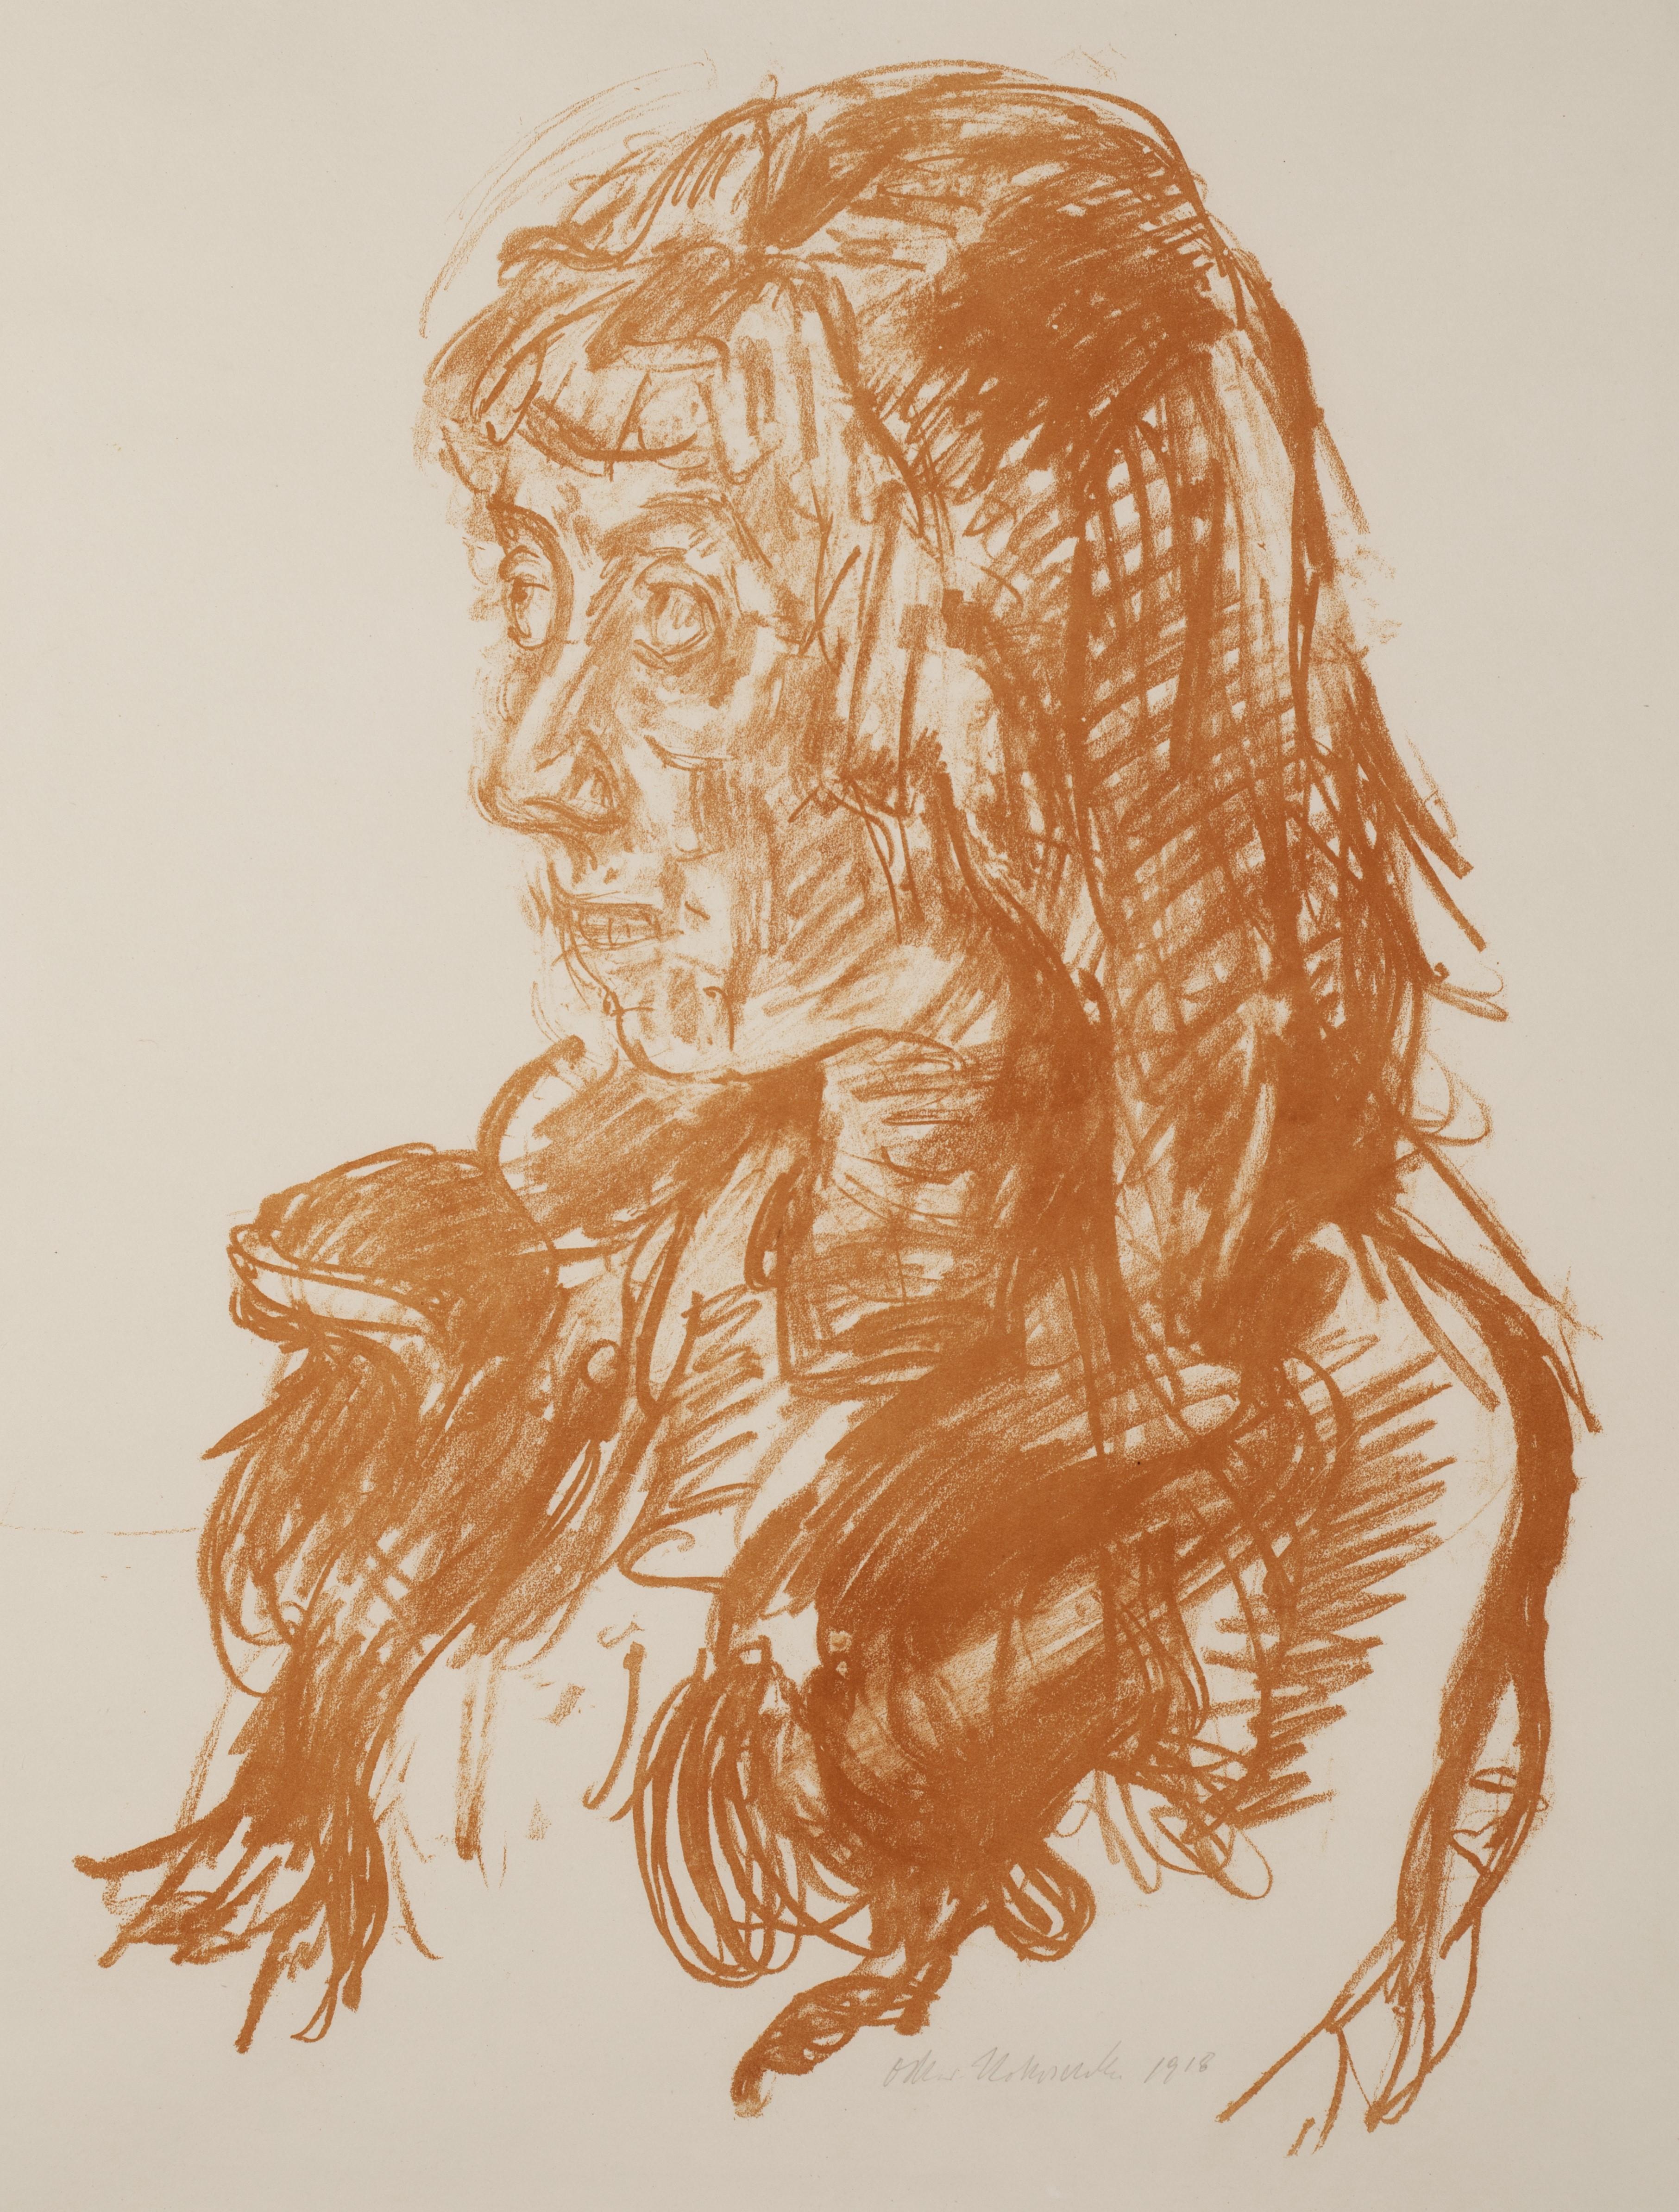 A color lithographic of a woman in portrait, looking to the left. It's rendered with expressive, graphic lines characteristic of German Expressionism.